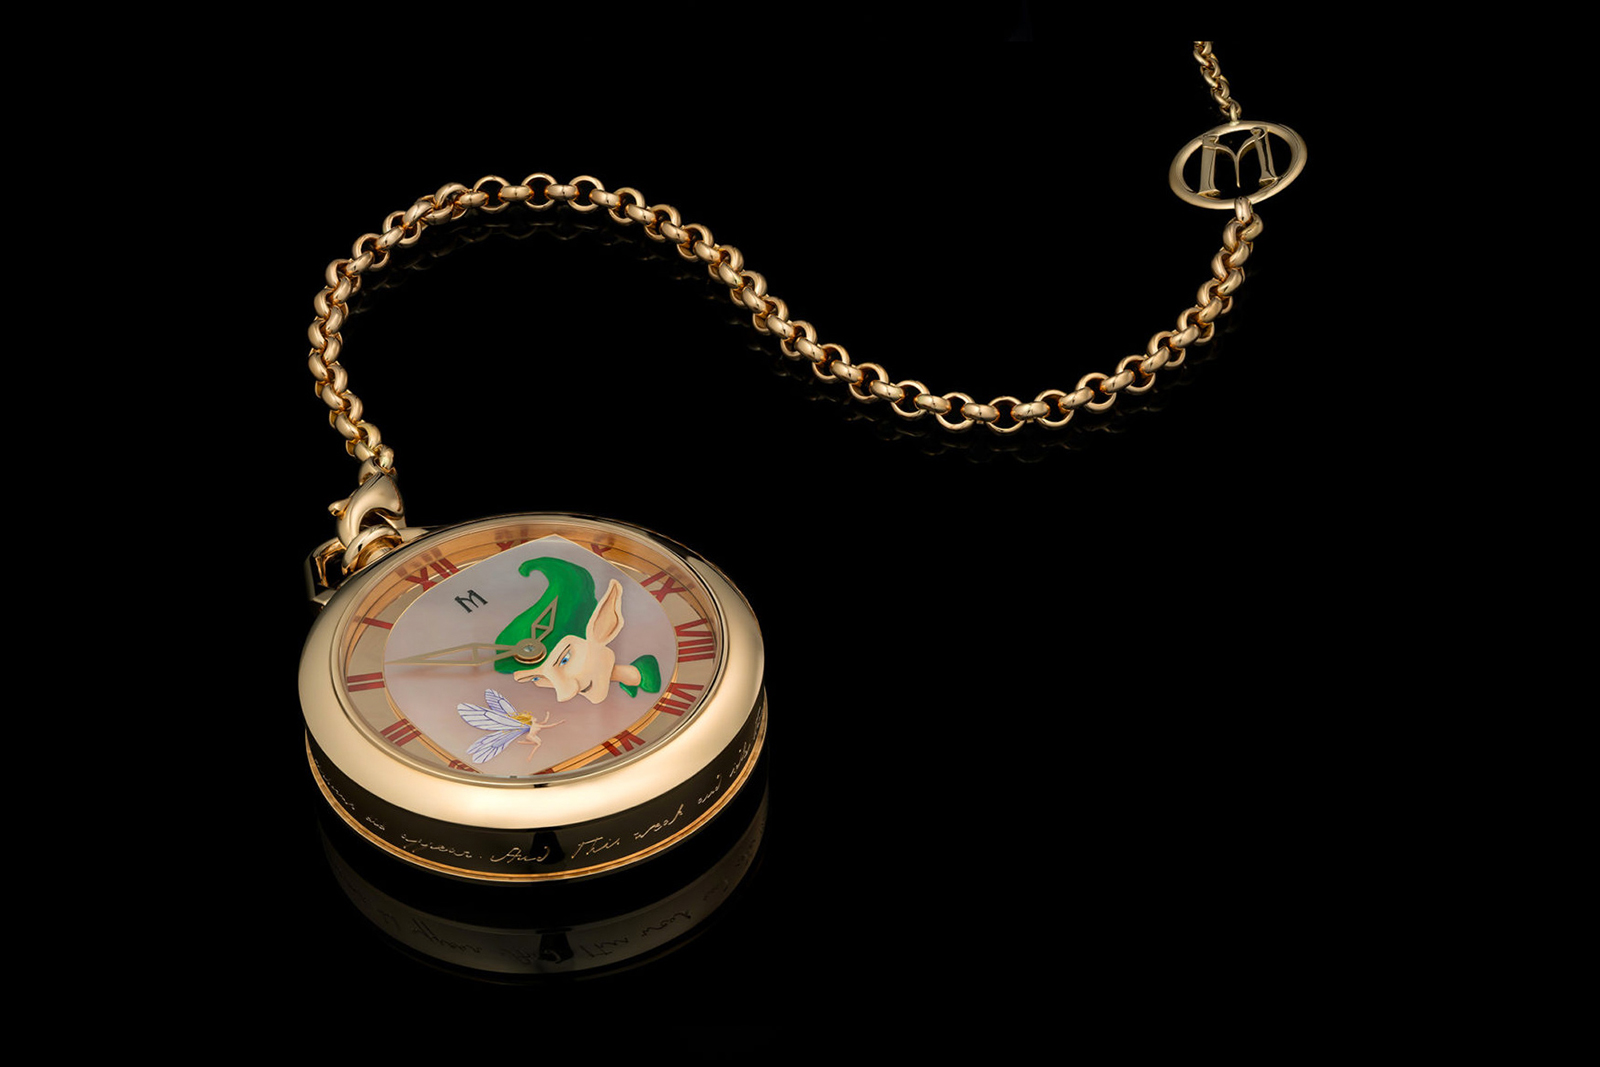 M Haute Joaillerie 'Puck' pocketwatch in 18k rose gold with cabochon emerald, and enamel painting on nacre